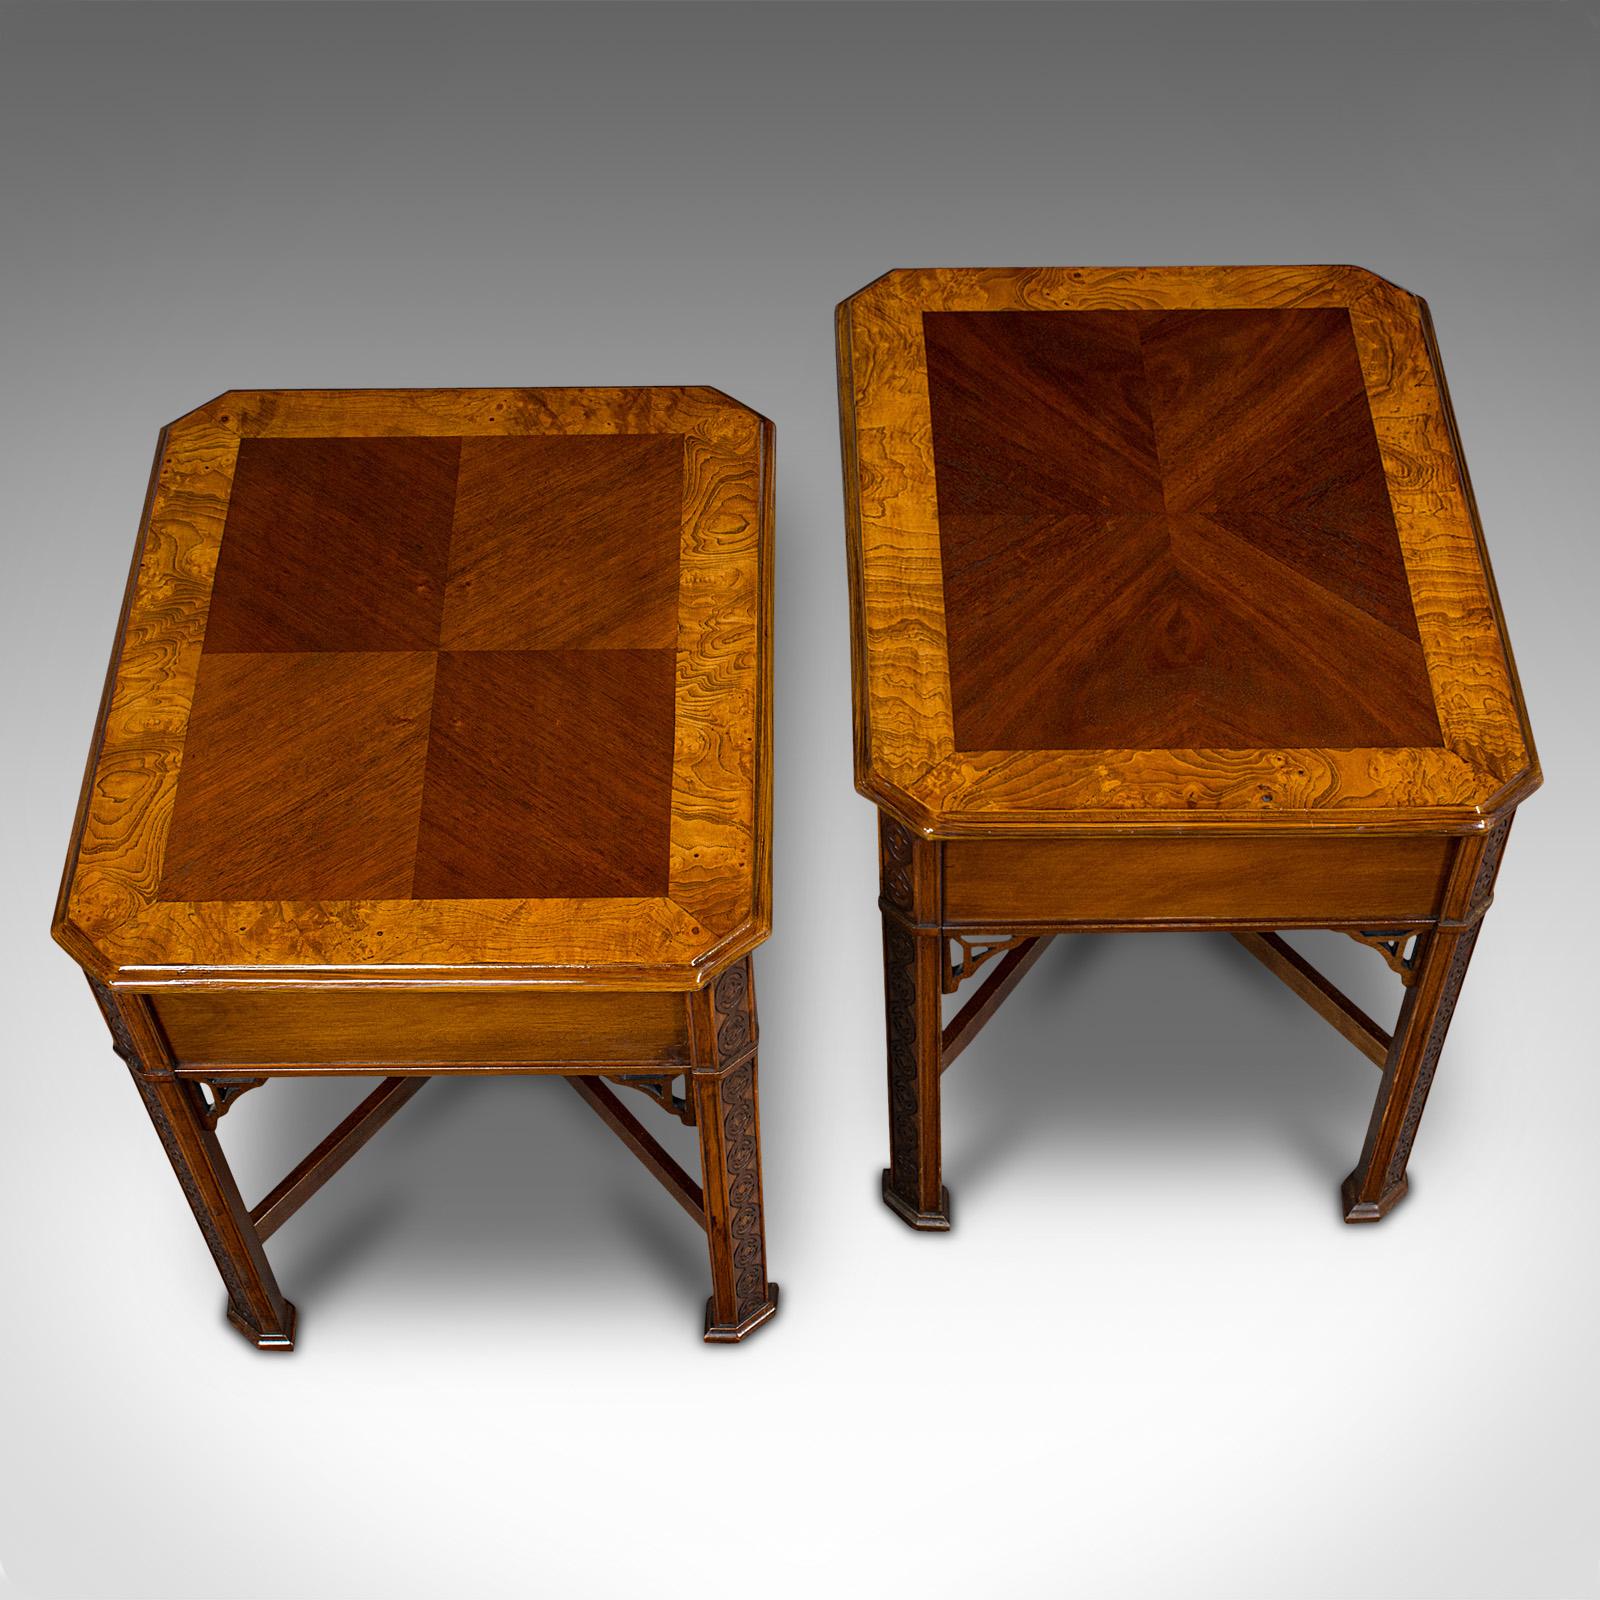 Pair of Vintage Bedside Tables, Chinese, Side, Nightstand, Chippendale Revival For Sale 4